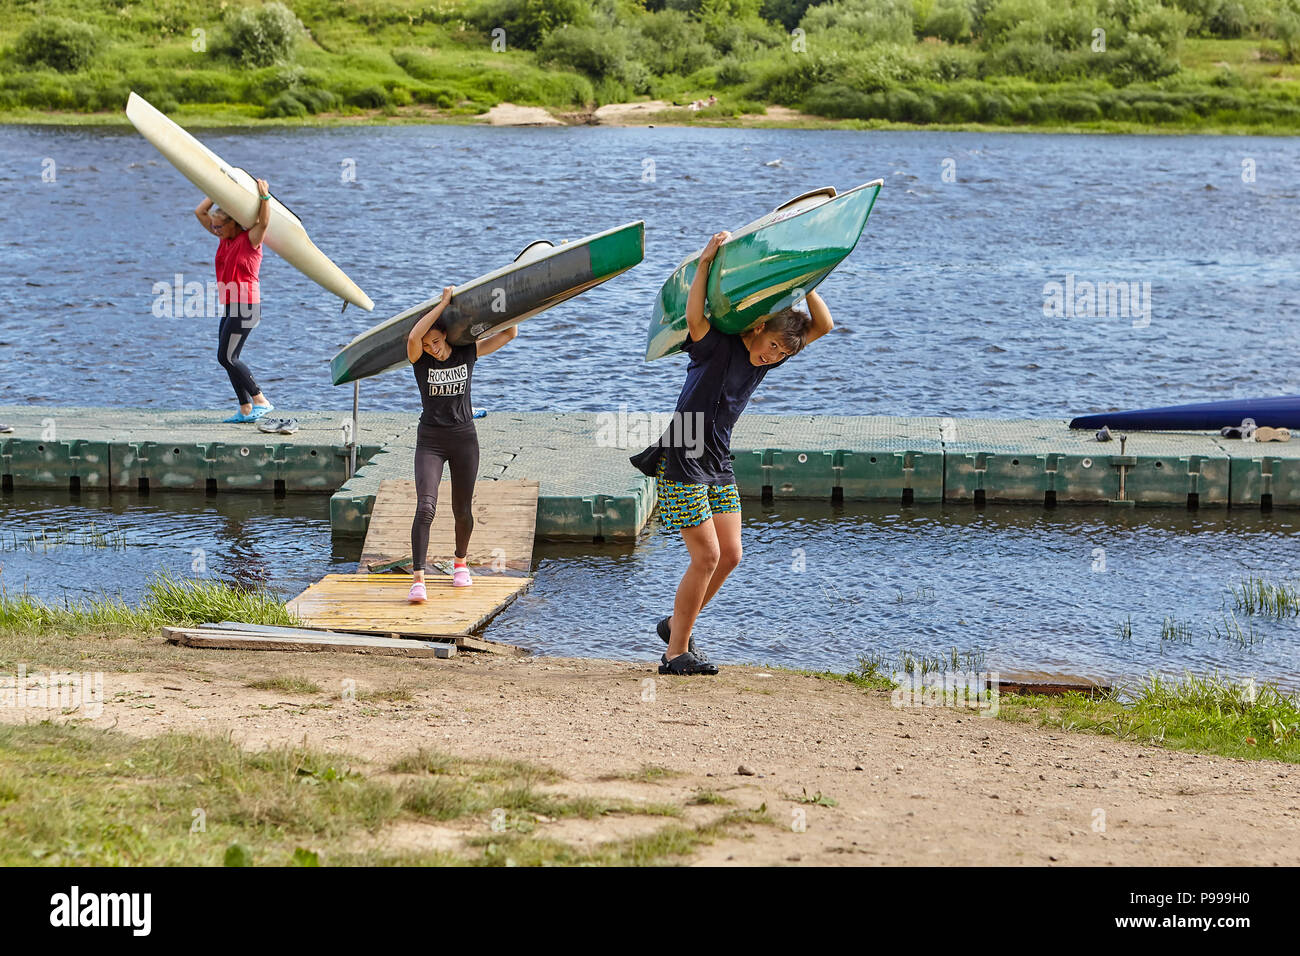 Polotsk, Belarus - July 6, 2018: After termination to rowing training, young athletes have got kayaks from water and carry them on coast on shoulders, Stock Photo